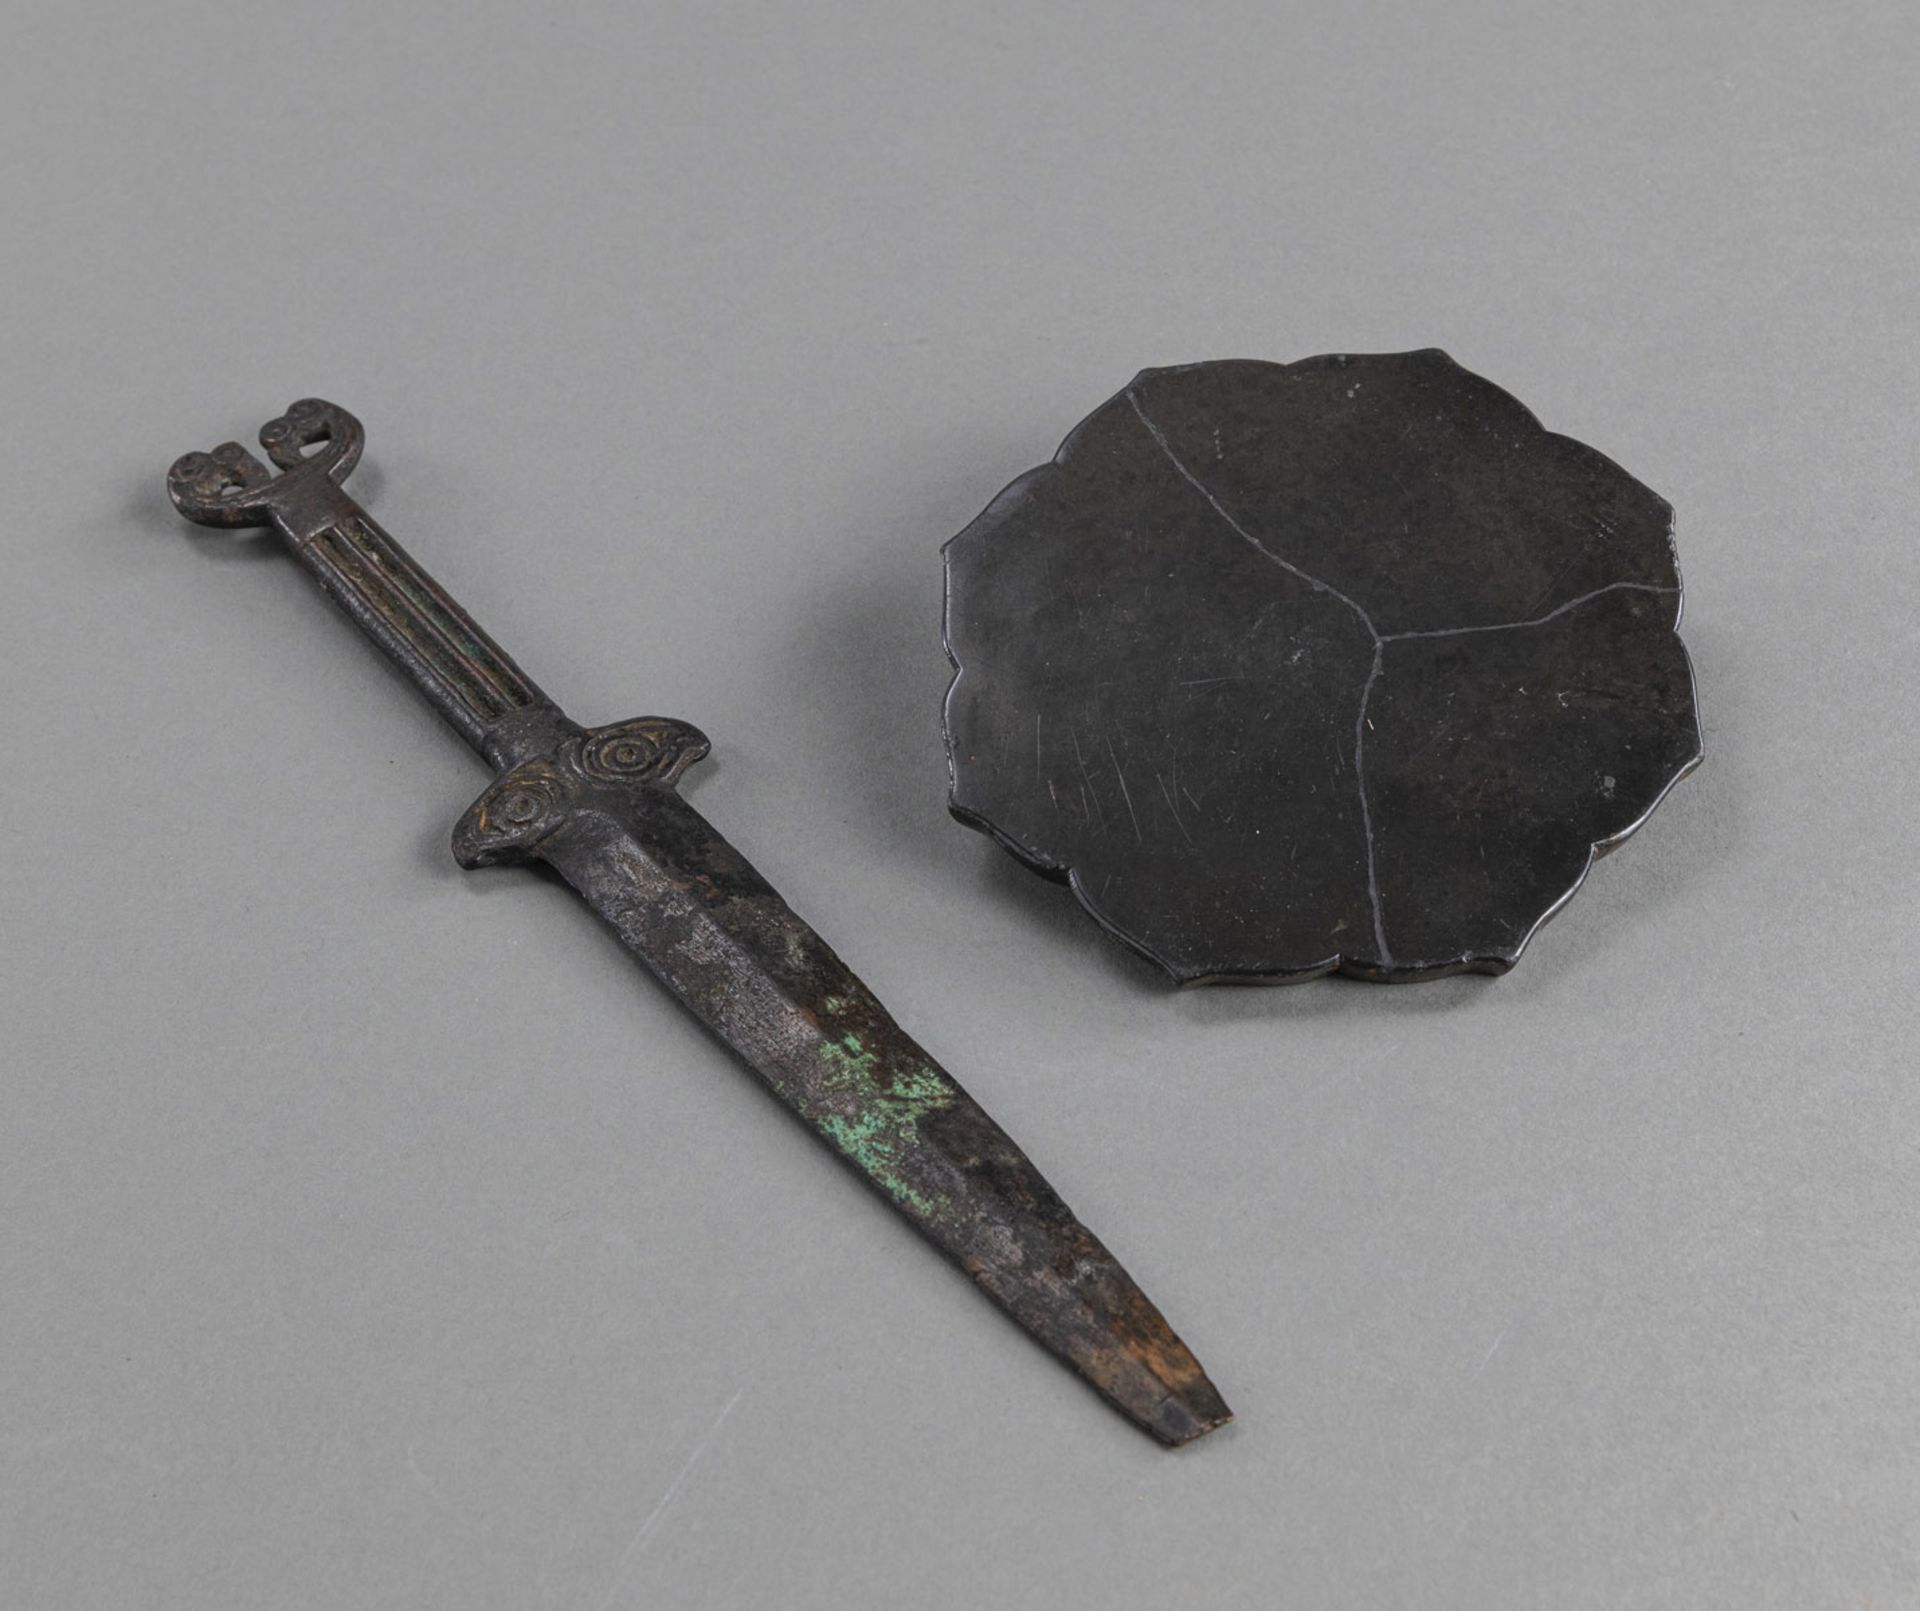 AN EIGHT-LOBED FLORAL BRONZE MIRROR AND A BRONZE DAGGER - Image 2 of 2